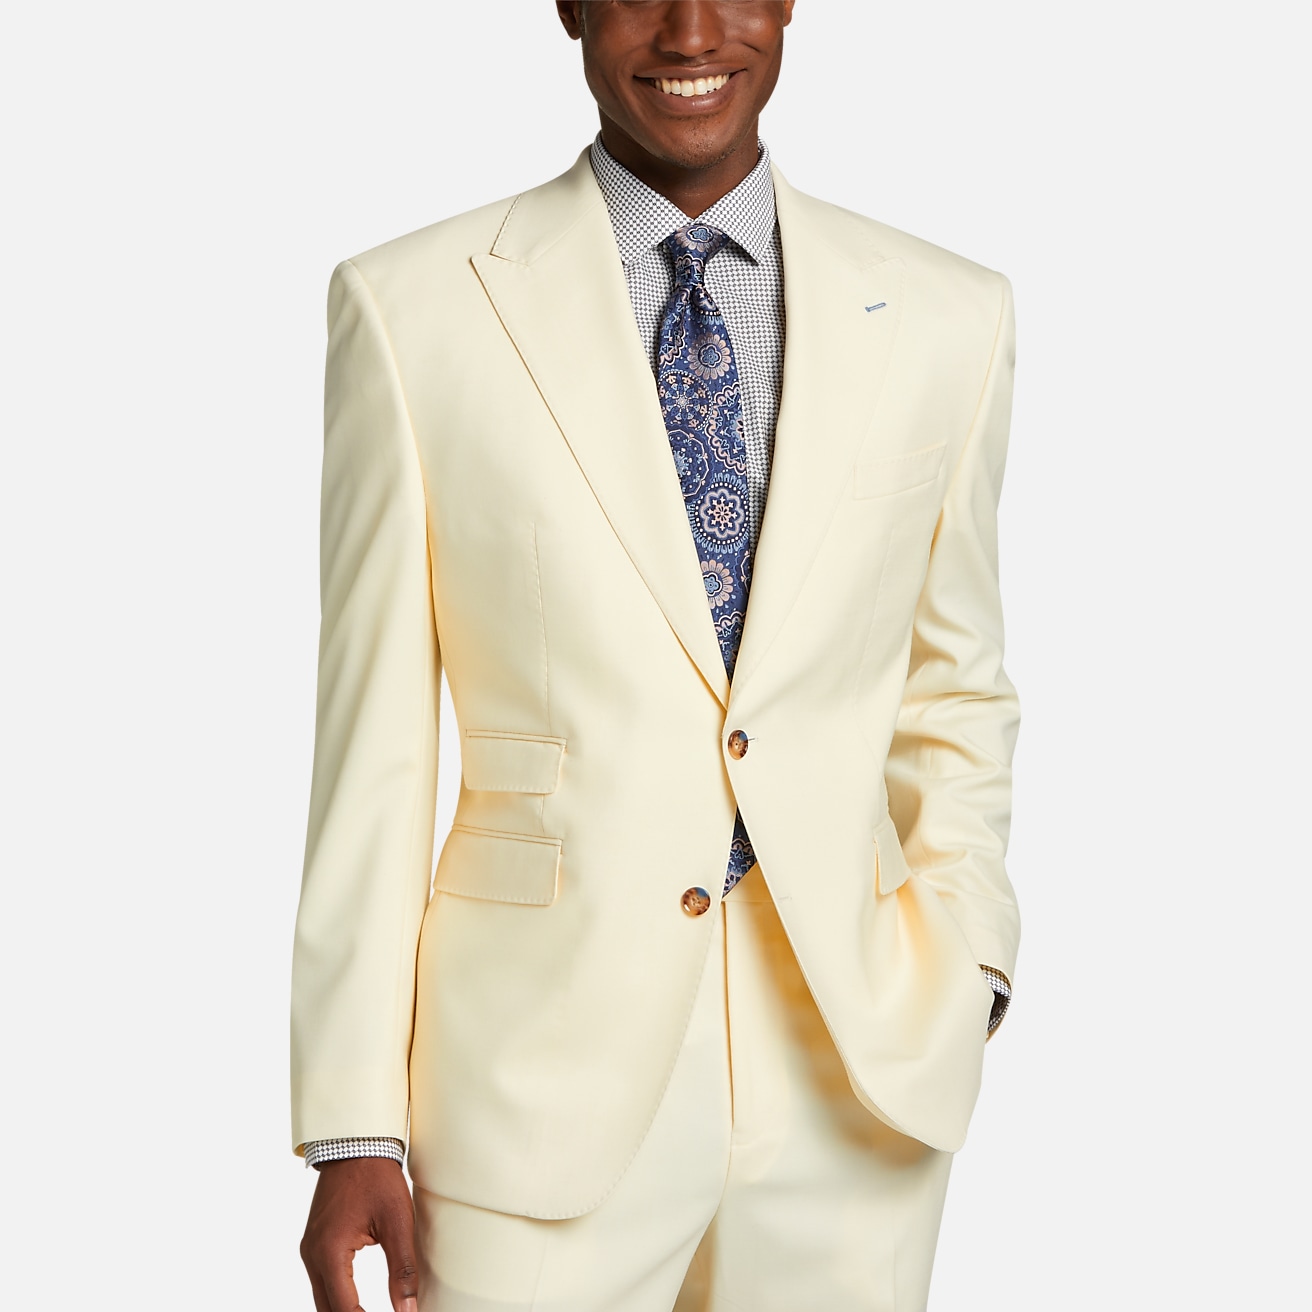 Tayion Classic Fit Suit Separates Jacket, All Sale